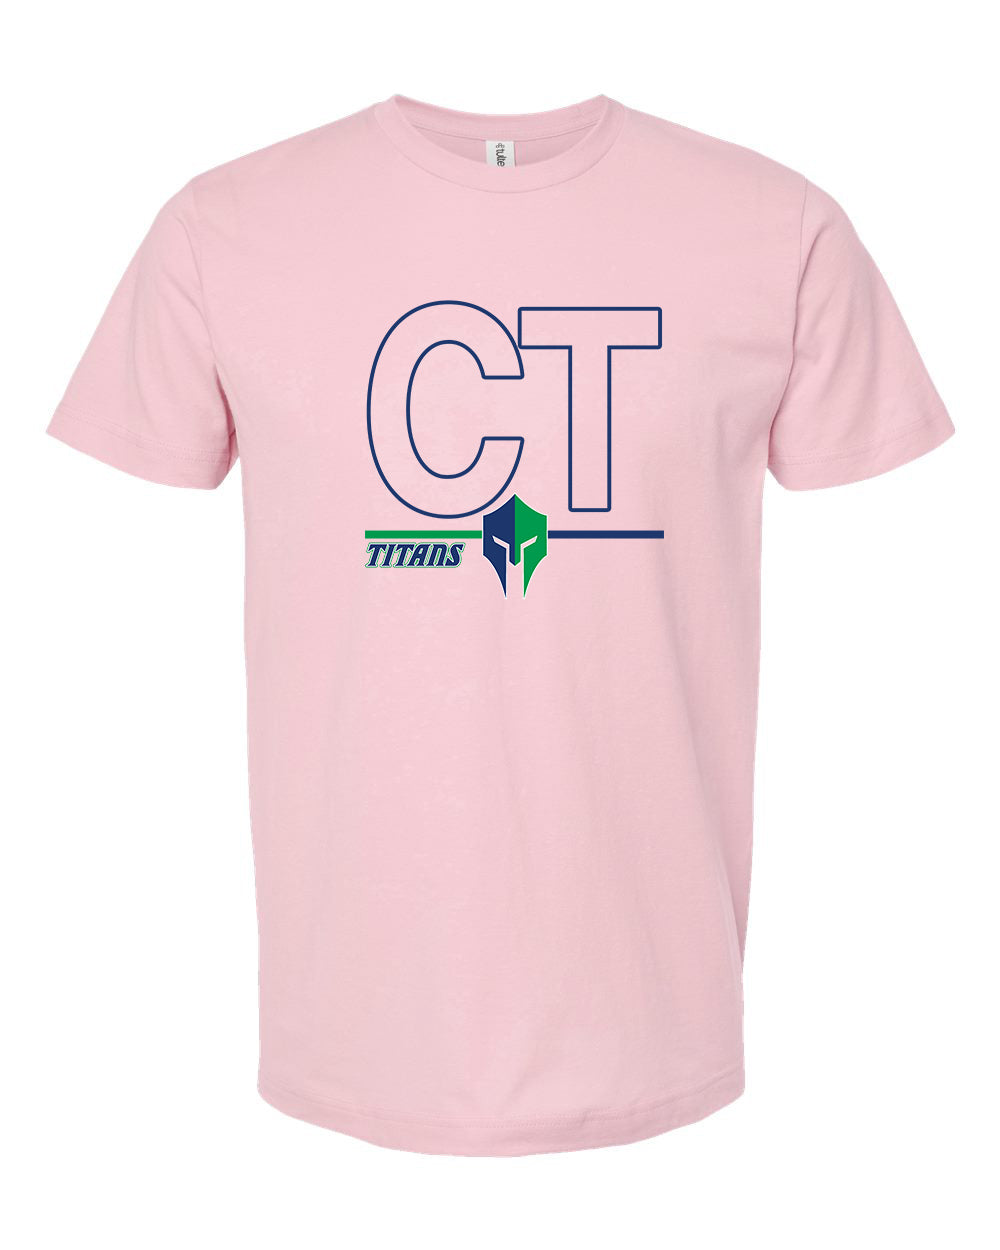 Titans Adult Tee "CT" - 202 (color options available)